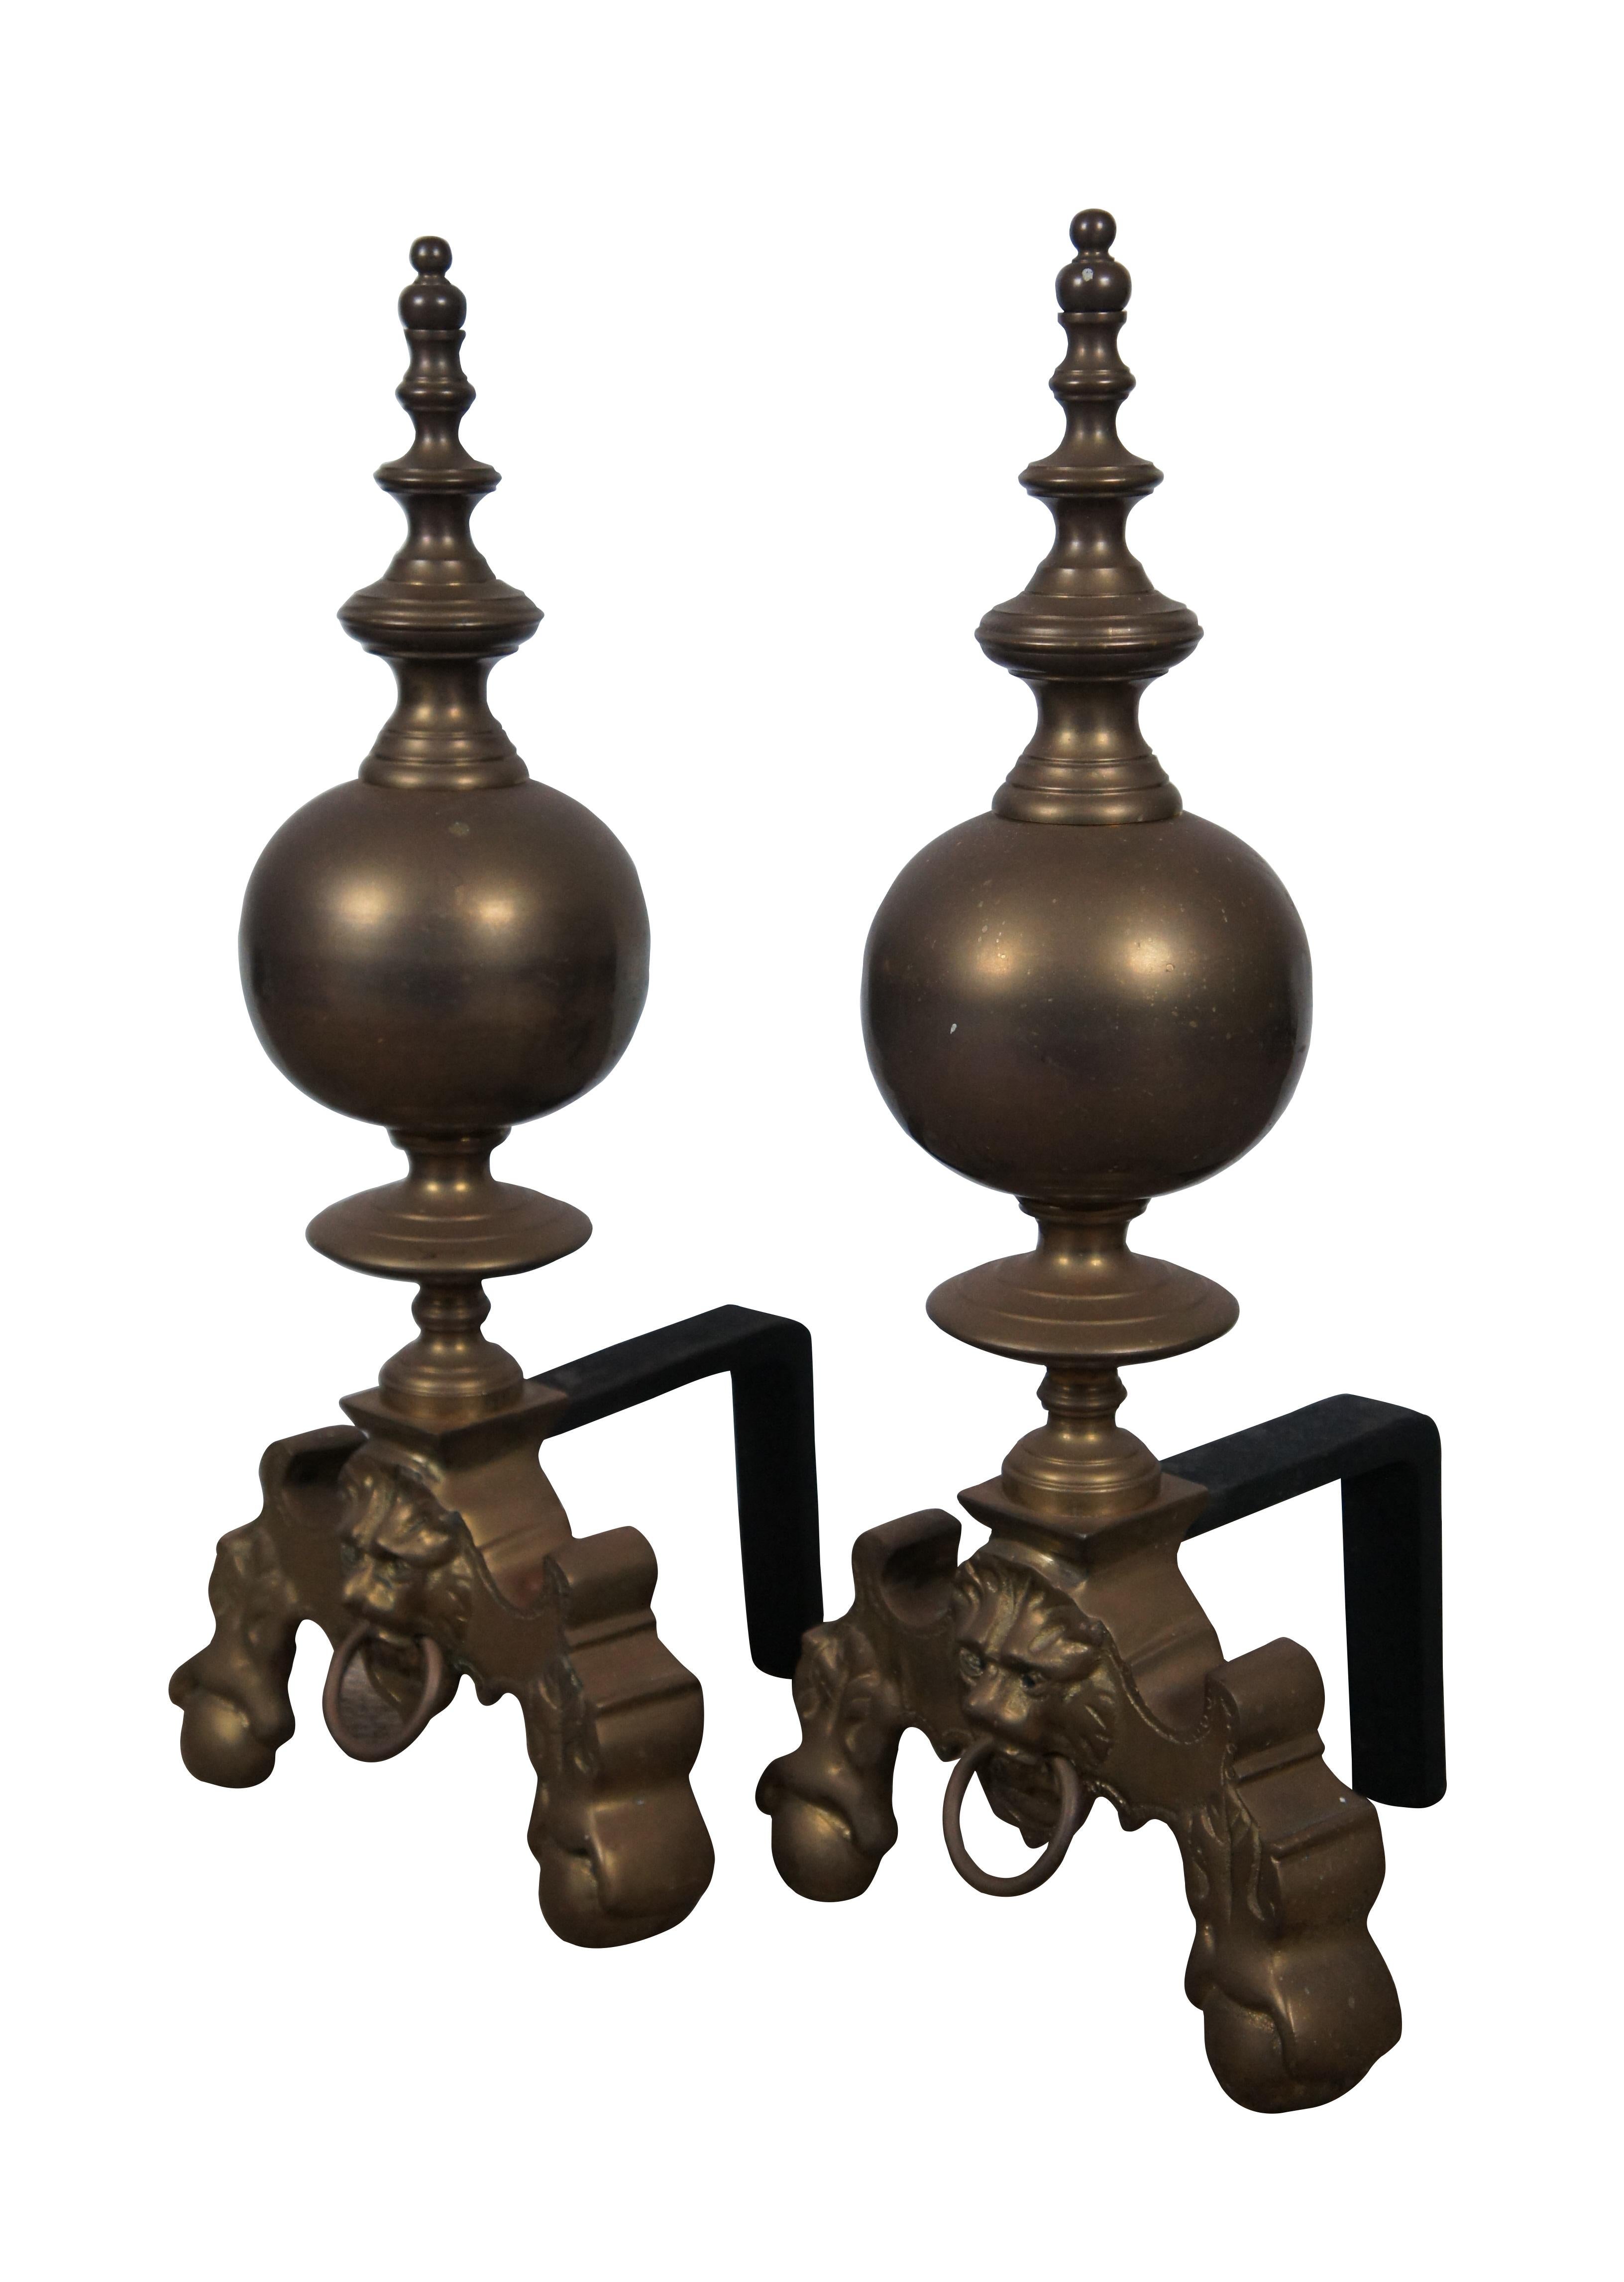 Vintage circa 1970's iron and brass firedogs / andirons featuring simplified ball and claw feet, lion's head with ring in it's mouth on the base, supporting a substantial cannonball baluster with turned finial.

Dimensions:
9.5